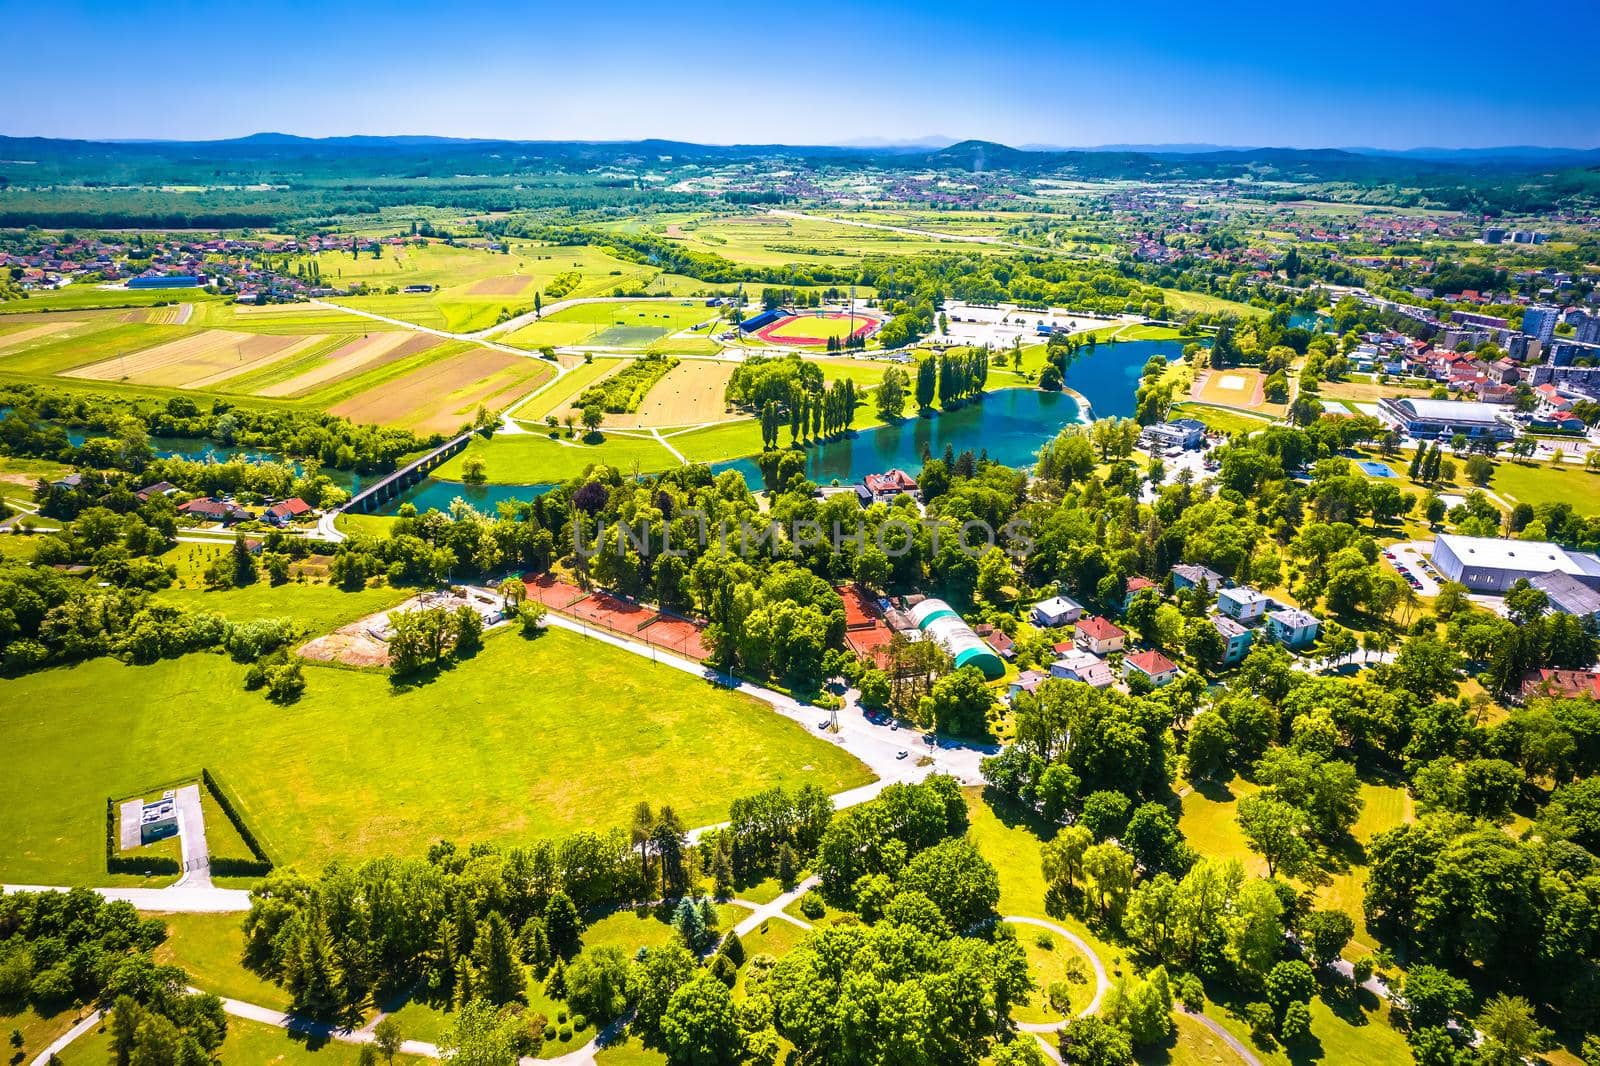 Aerial view of Korana river and green landscape in town of Karlovac, central Croatia 